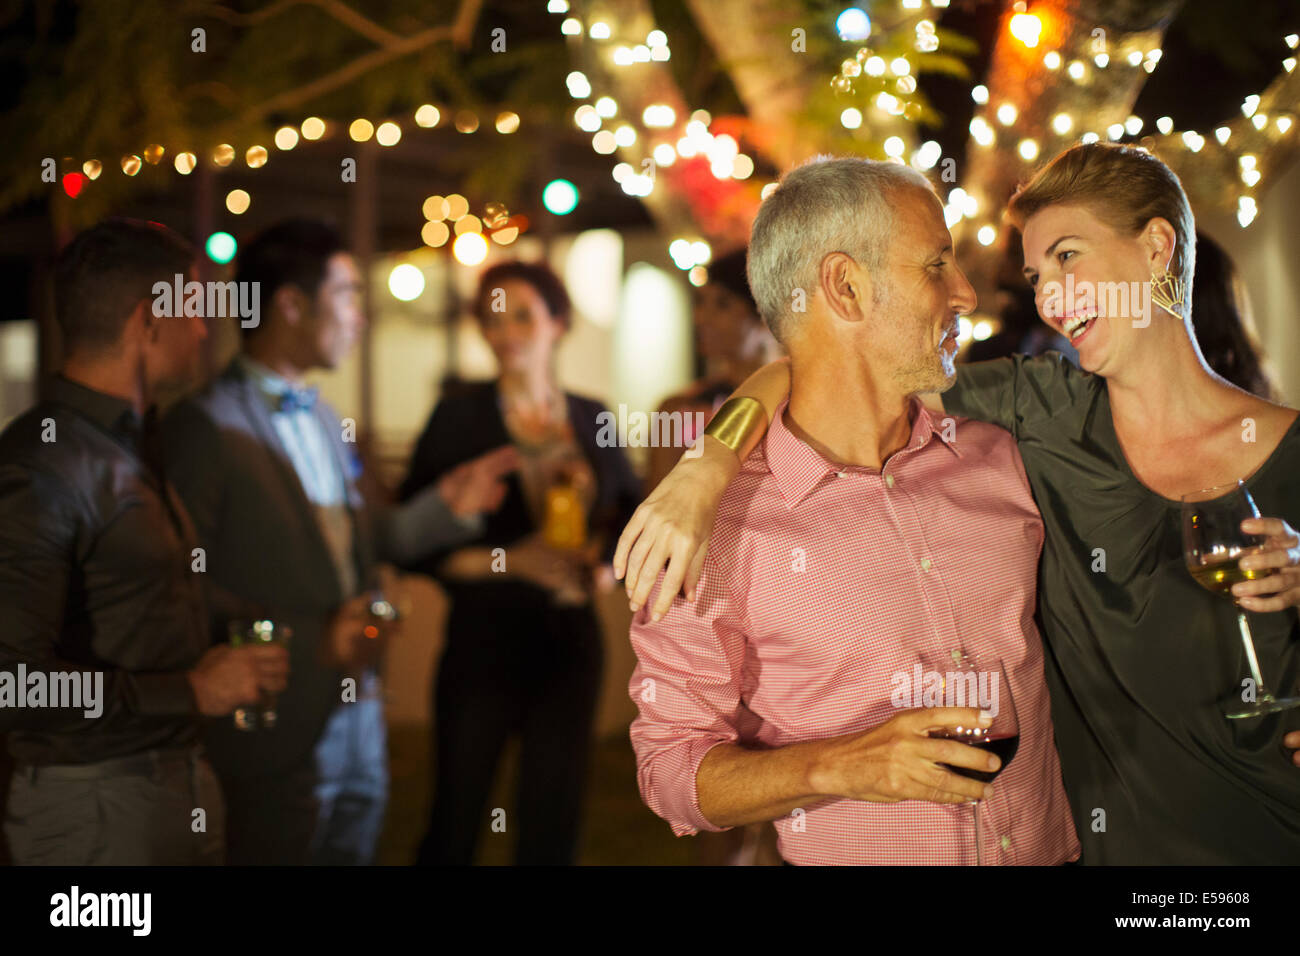 Couple hugging at party Banque D'Images